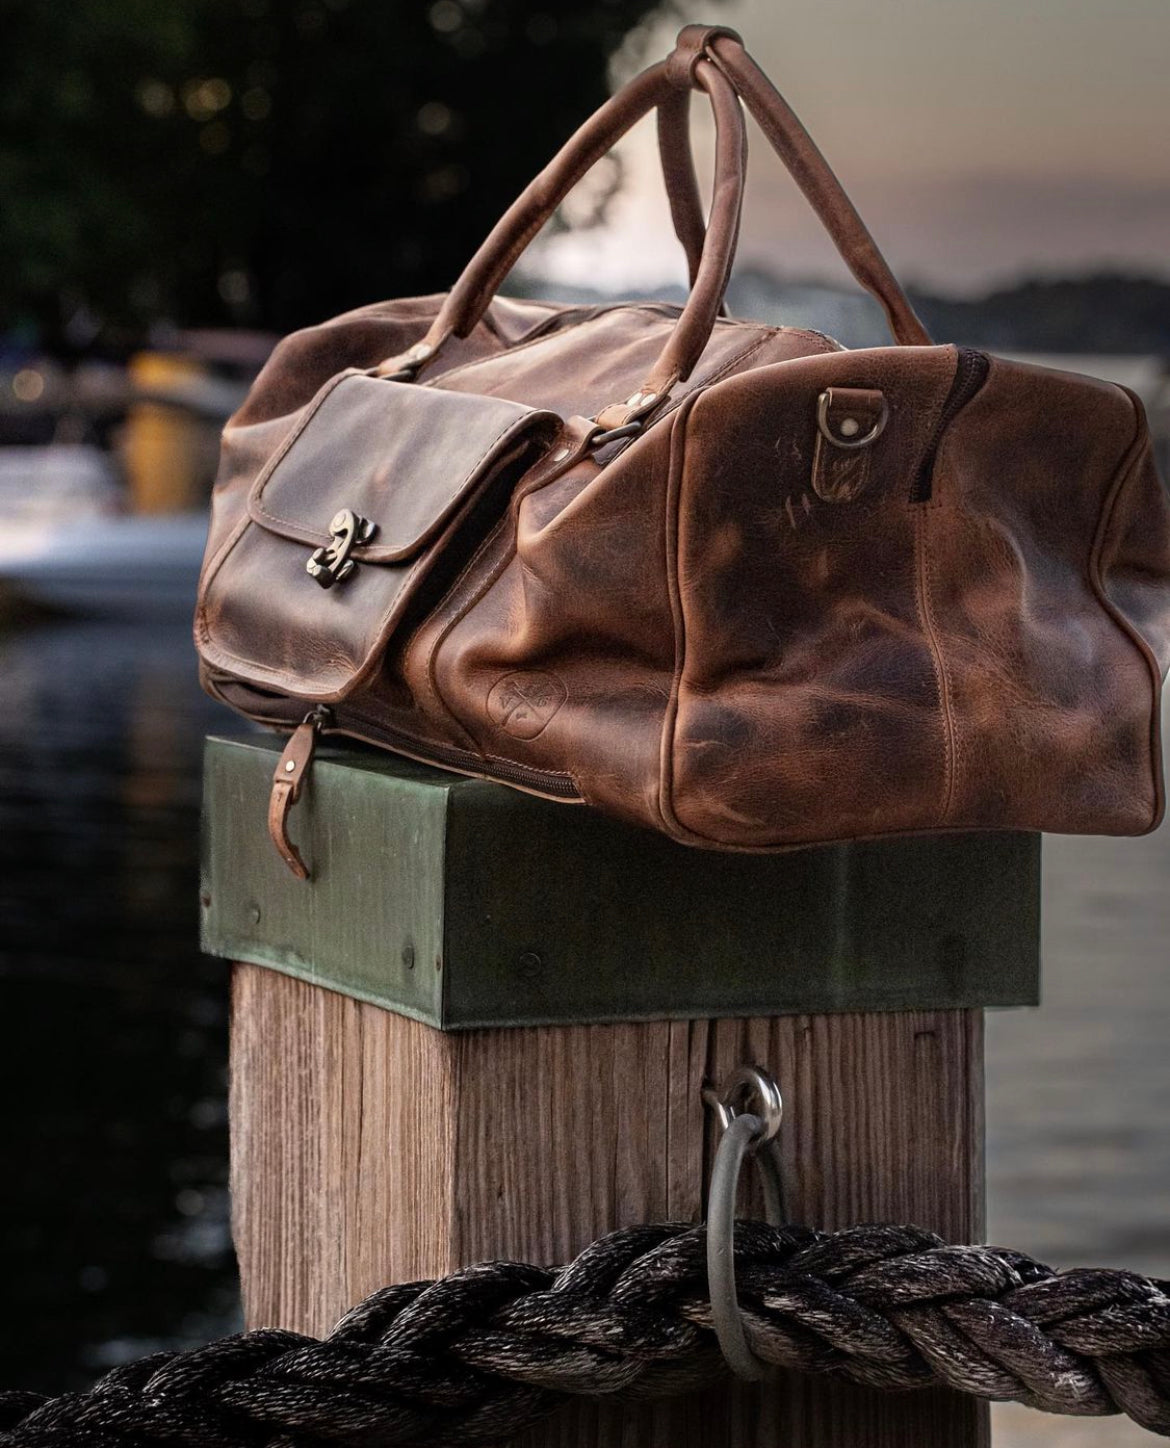 No. 39: The Roughneck - Large Buffalo Leather Roll-top Duffle Bag